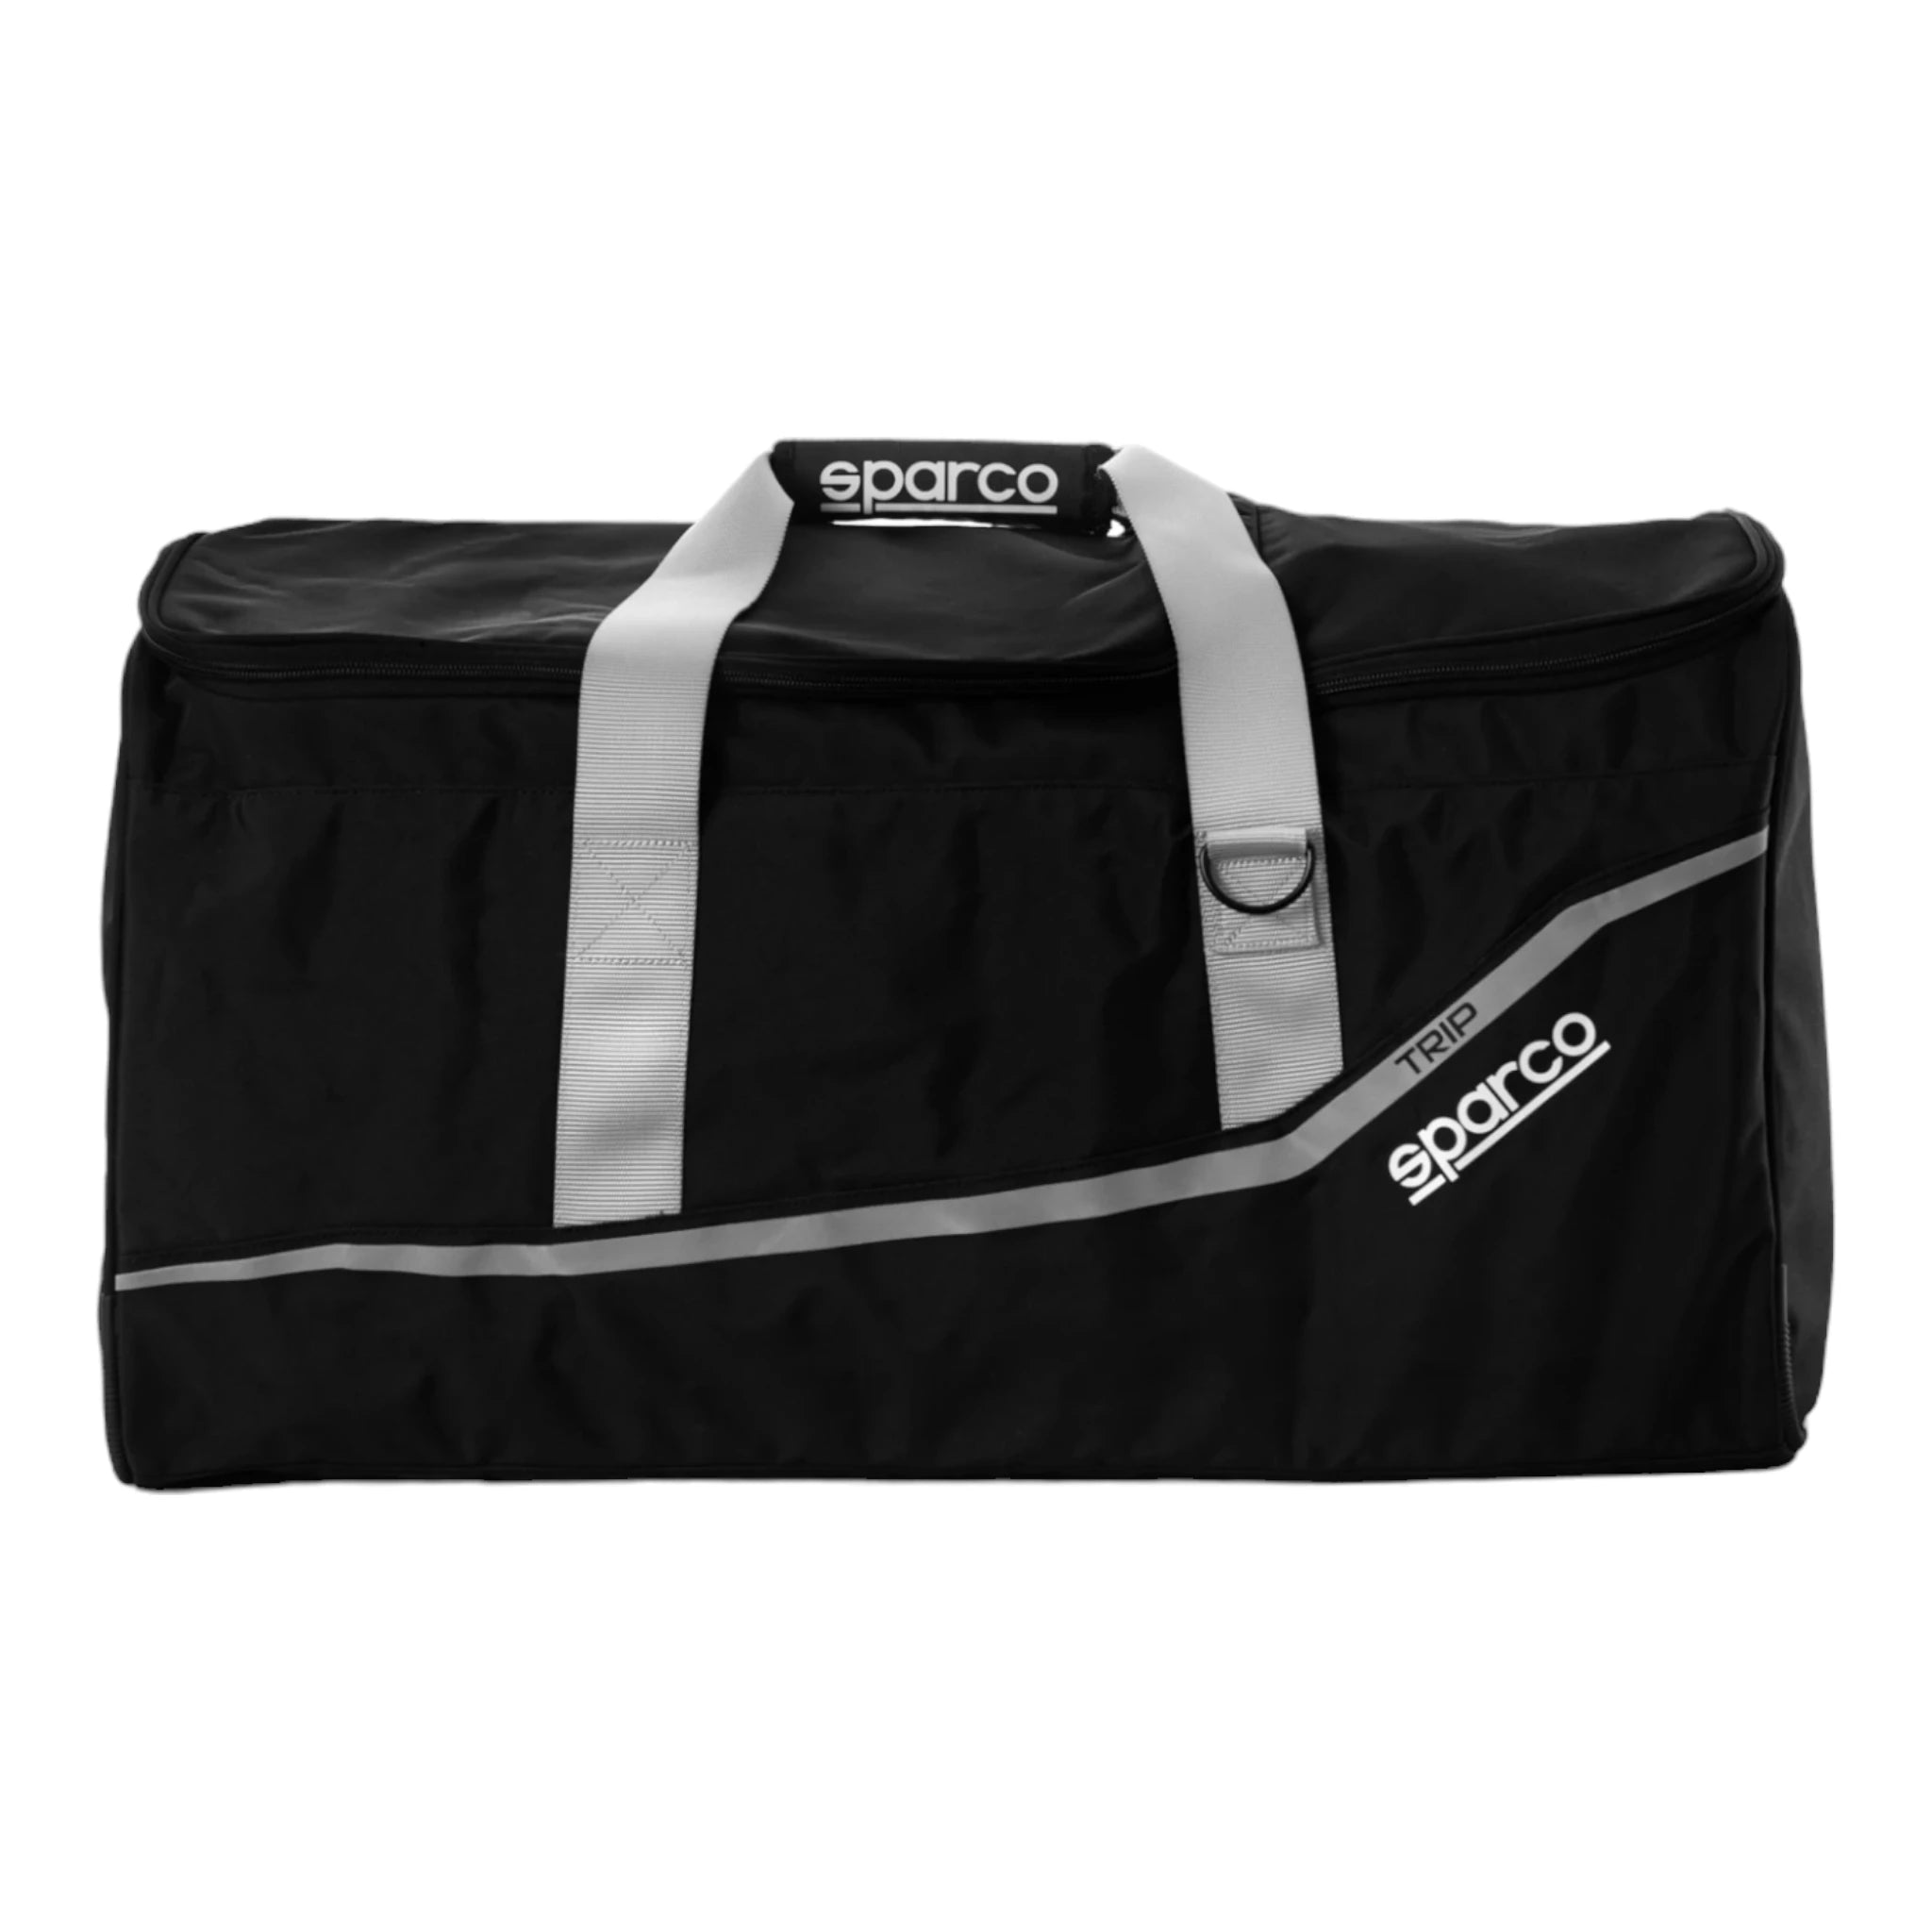 Sparco Trip Gearbag